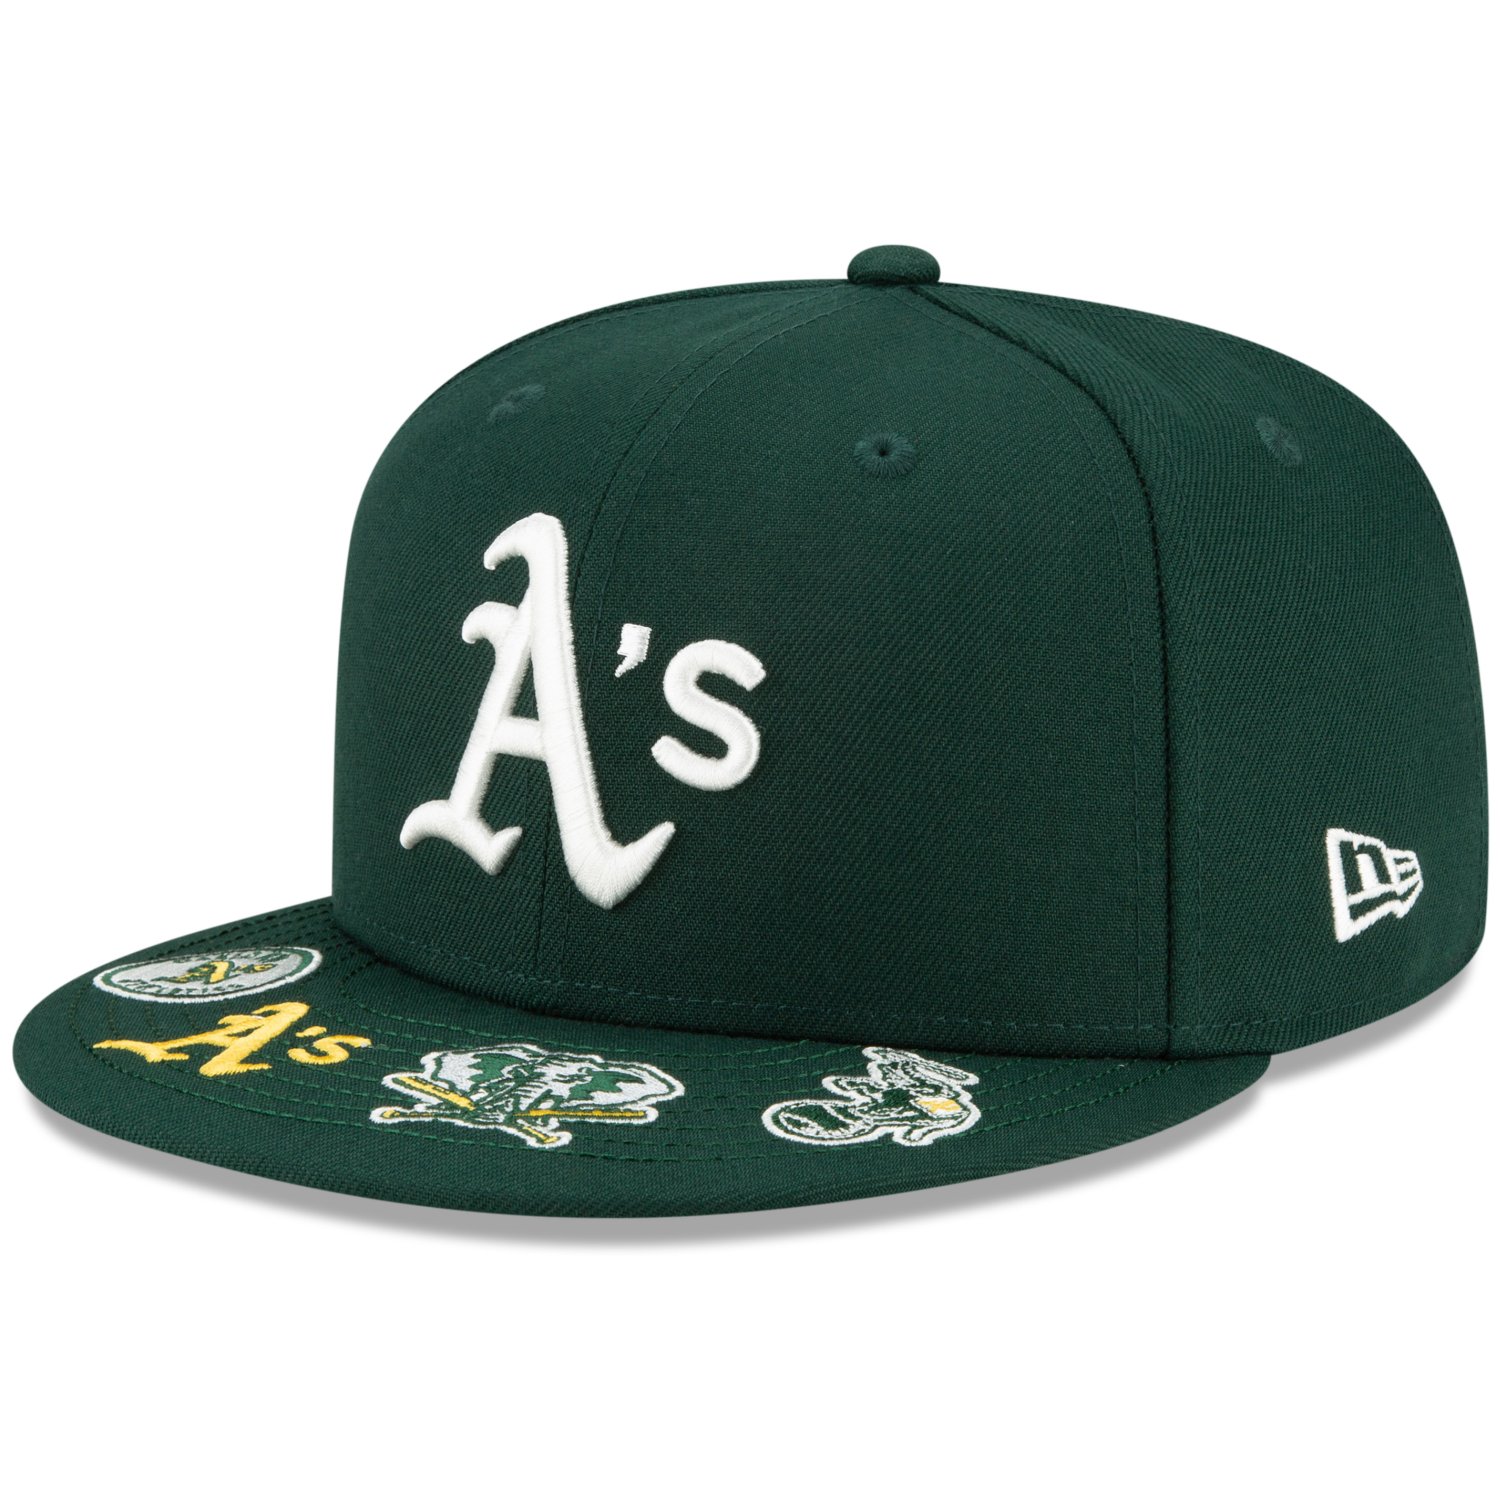 New Era 59Fifty Fitted Cap - GRAPHIC VISOR Oakland Athletics | Fitted ...